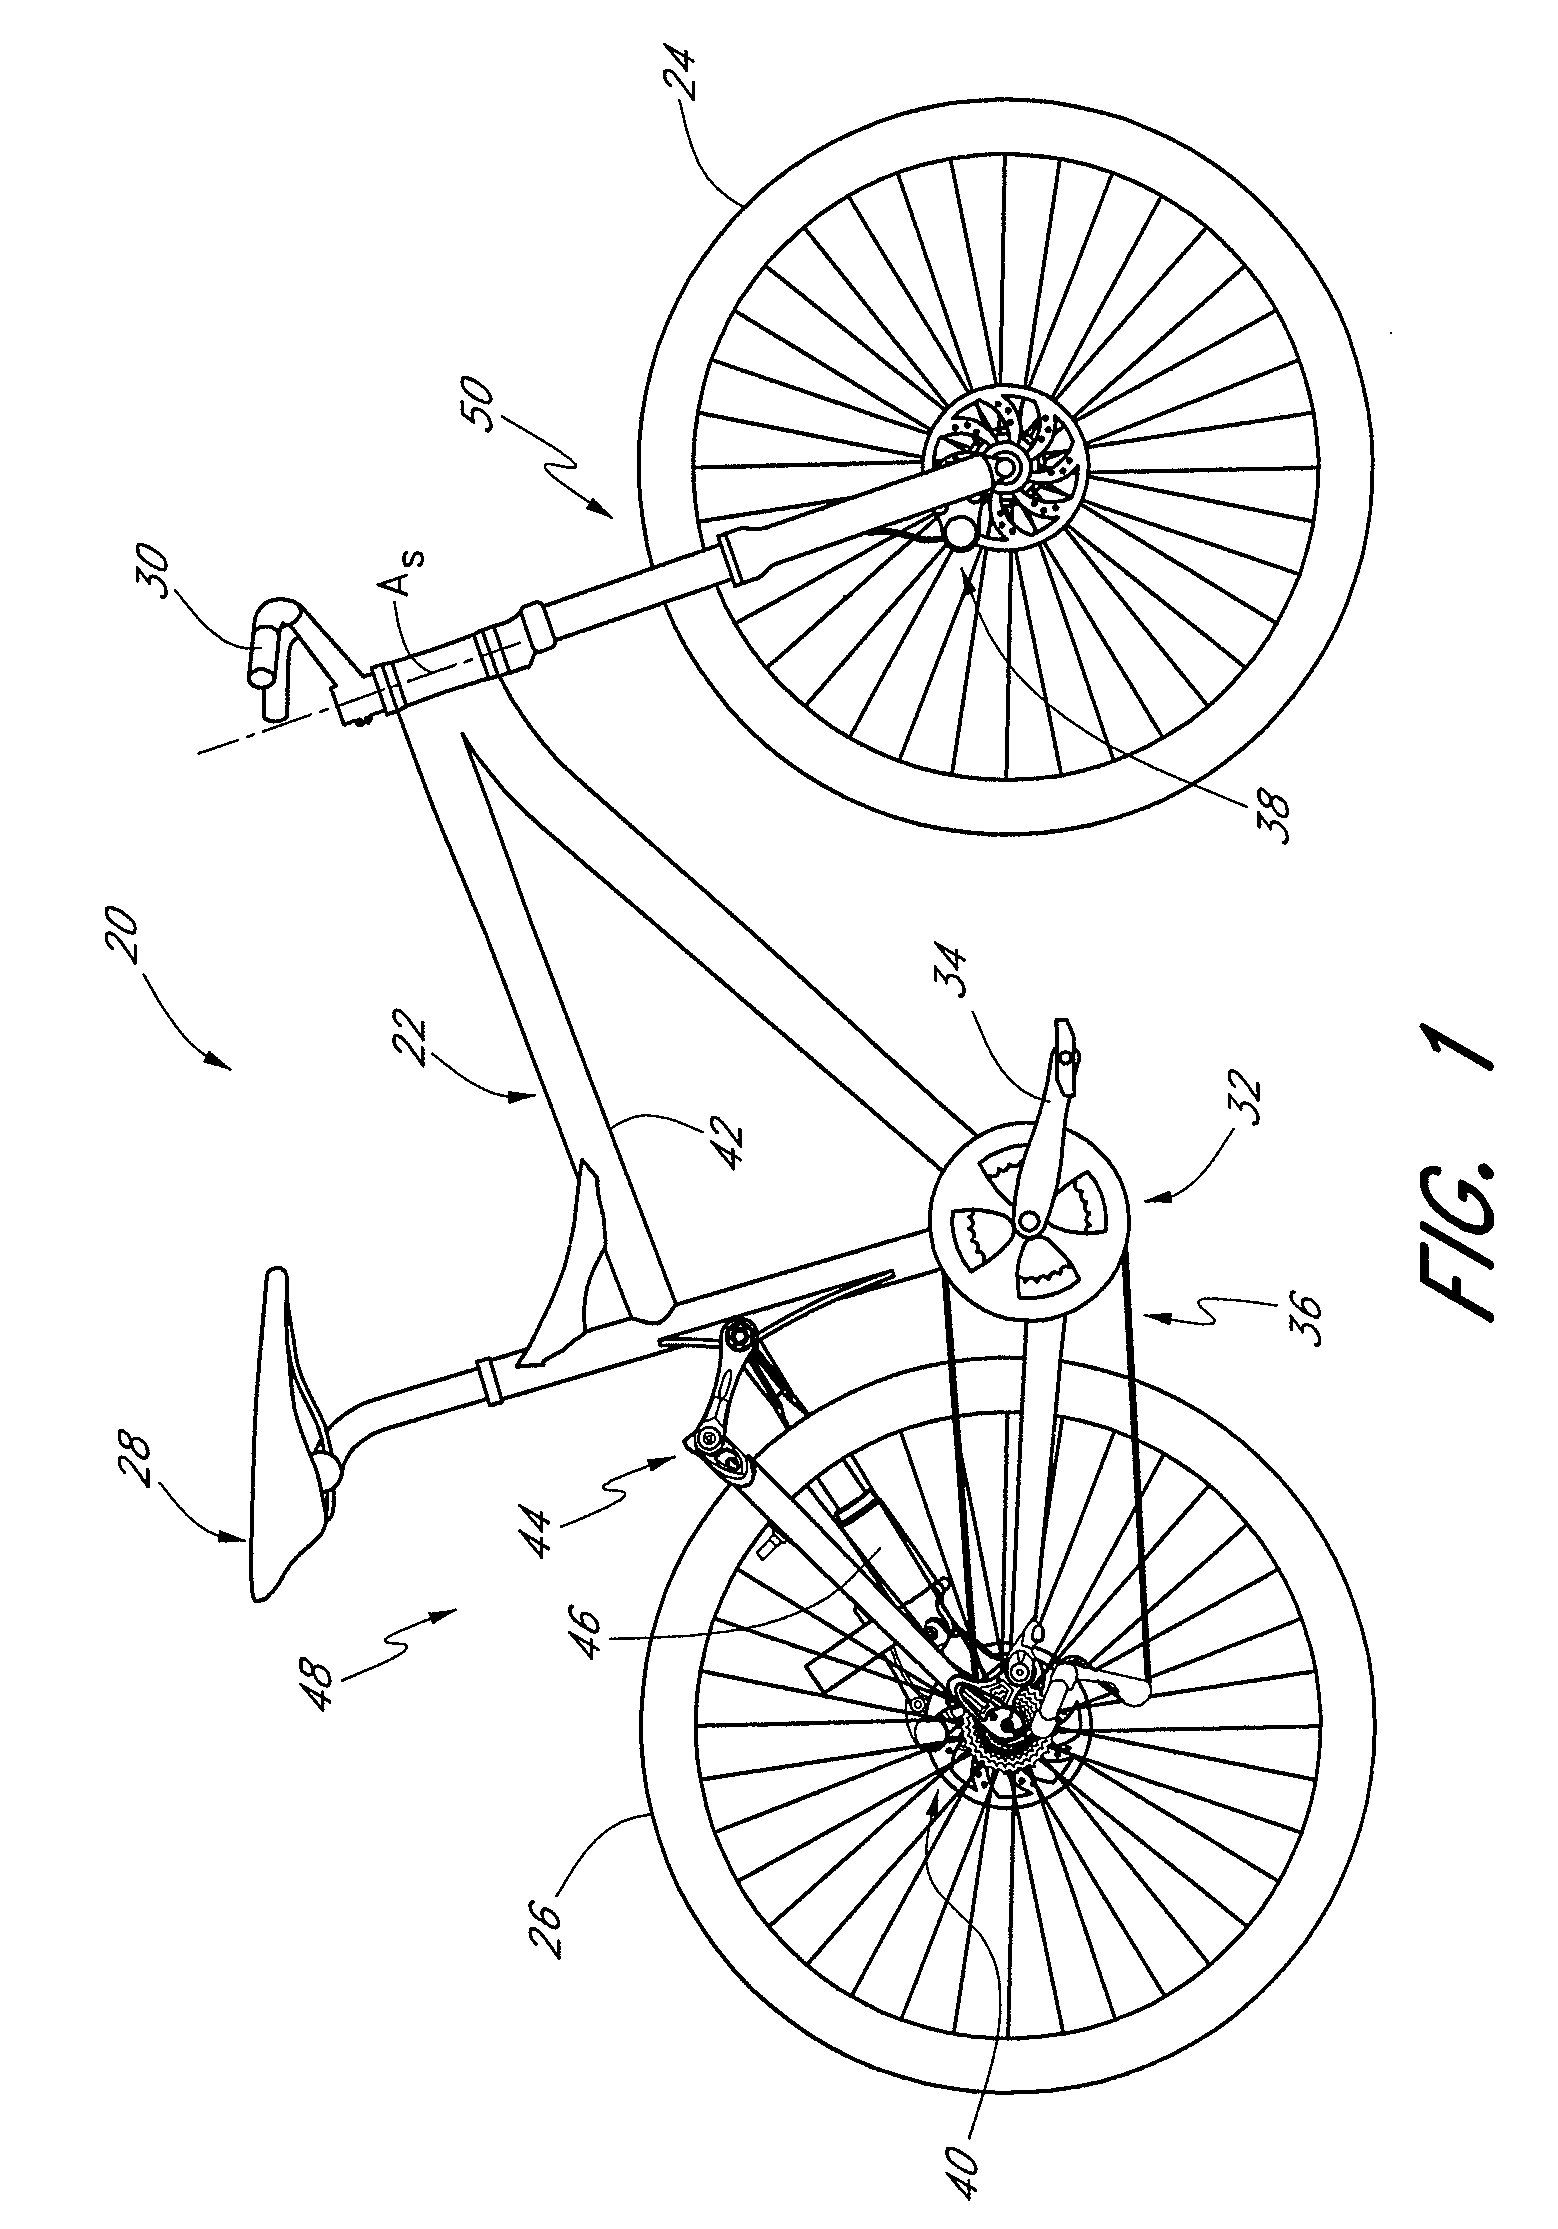 Bicycle suspension assembly